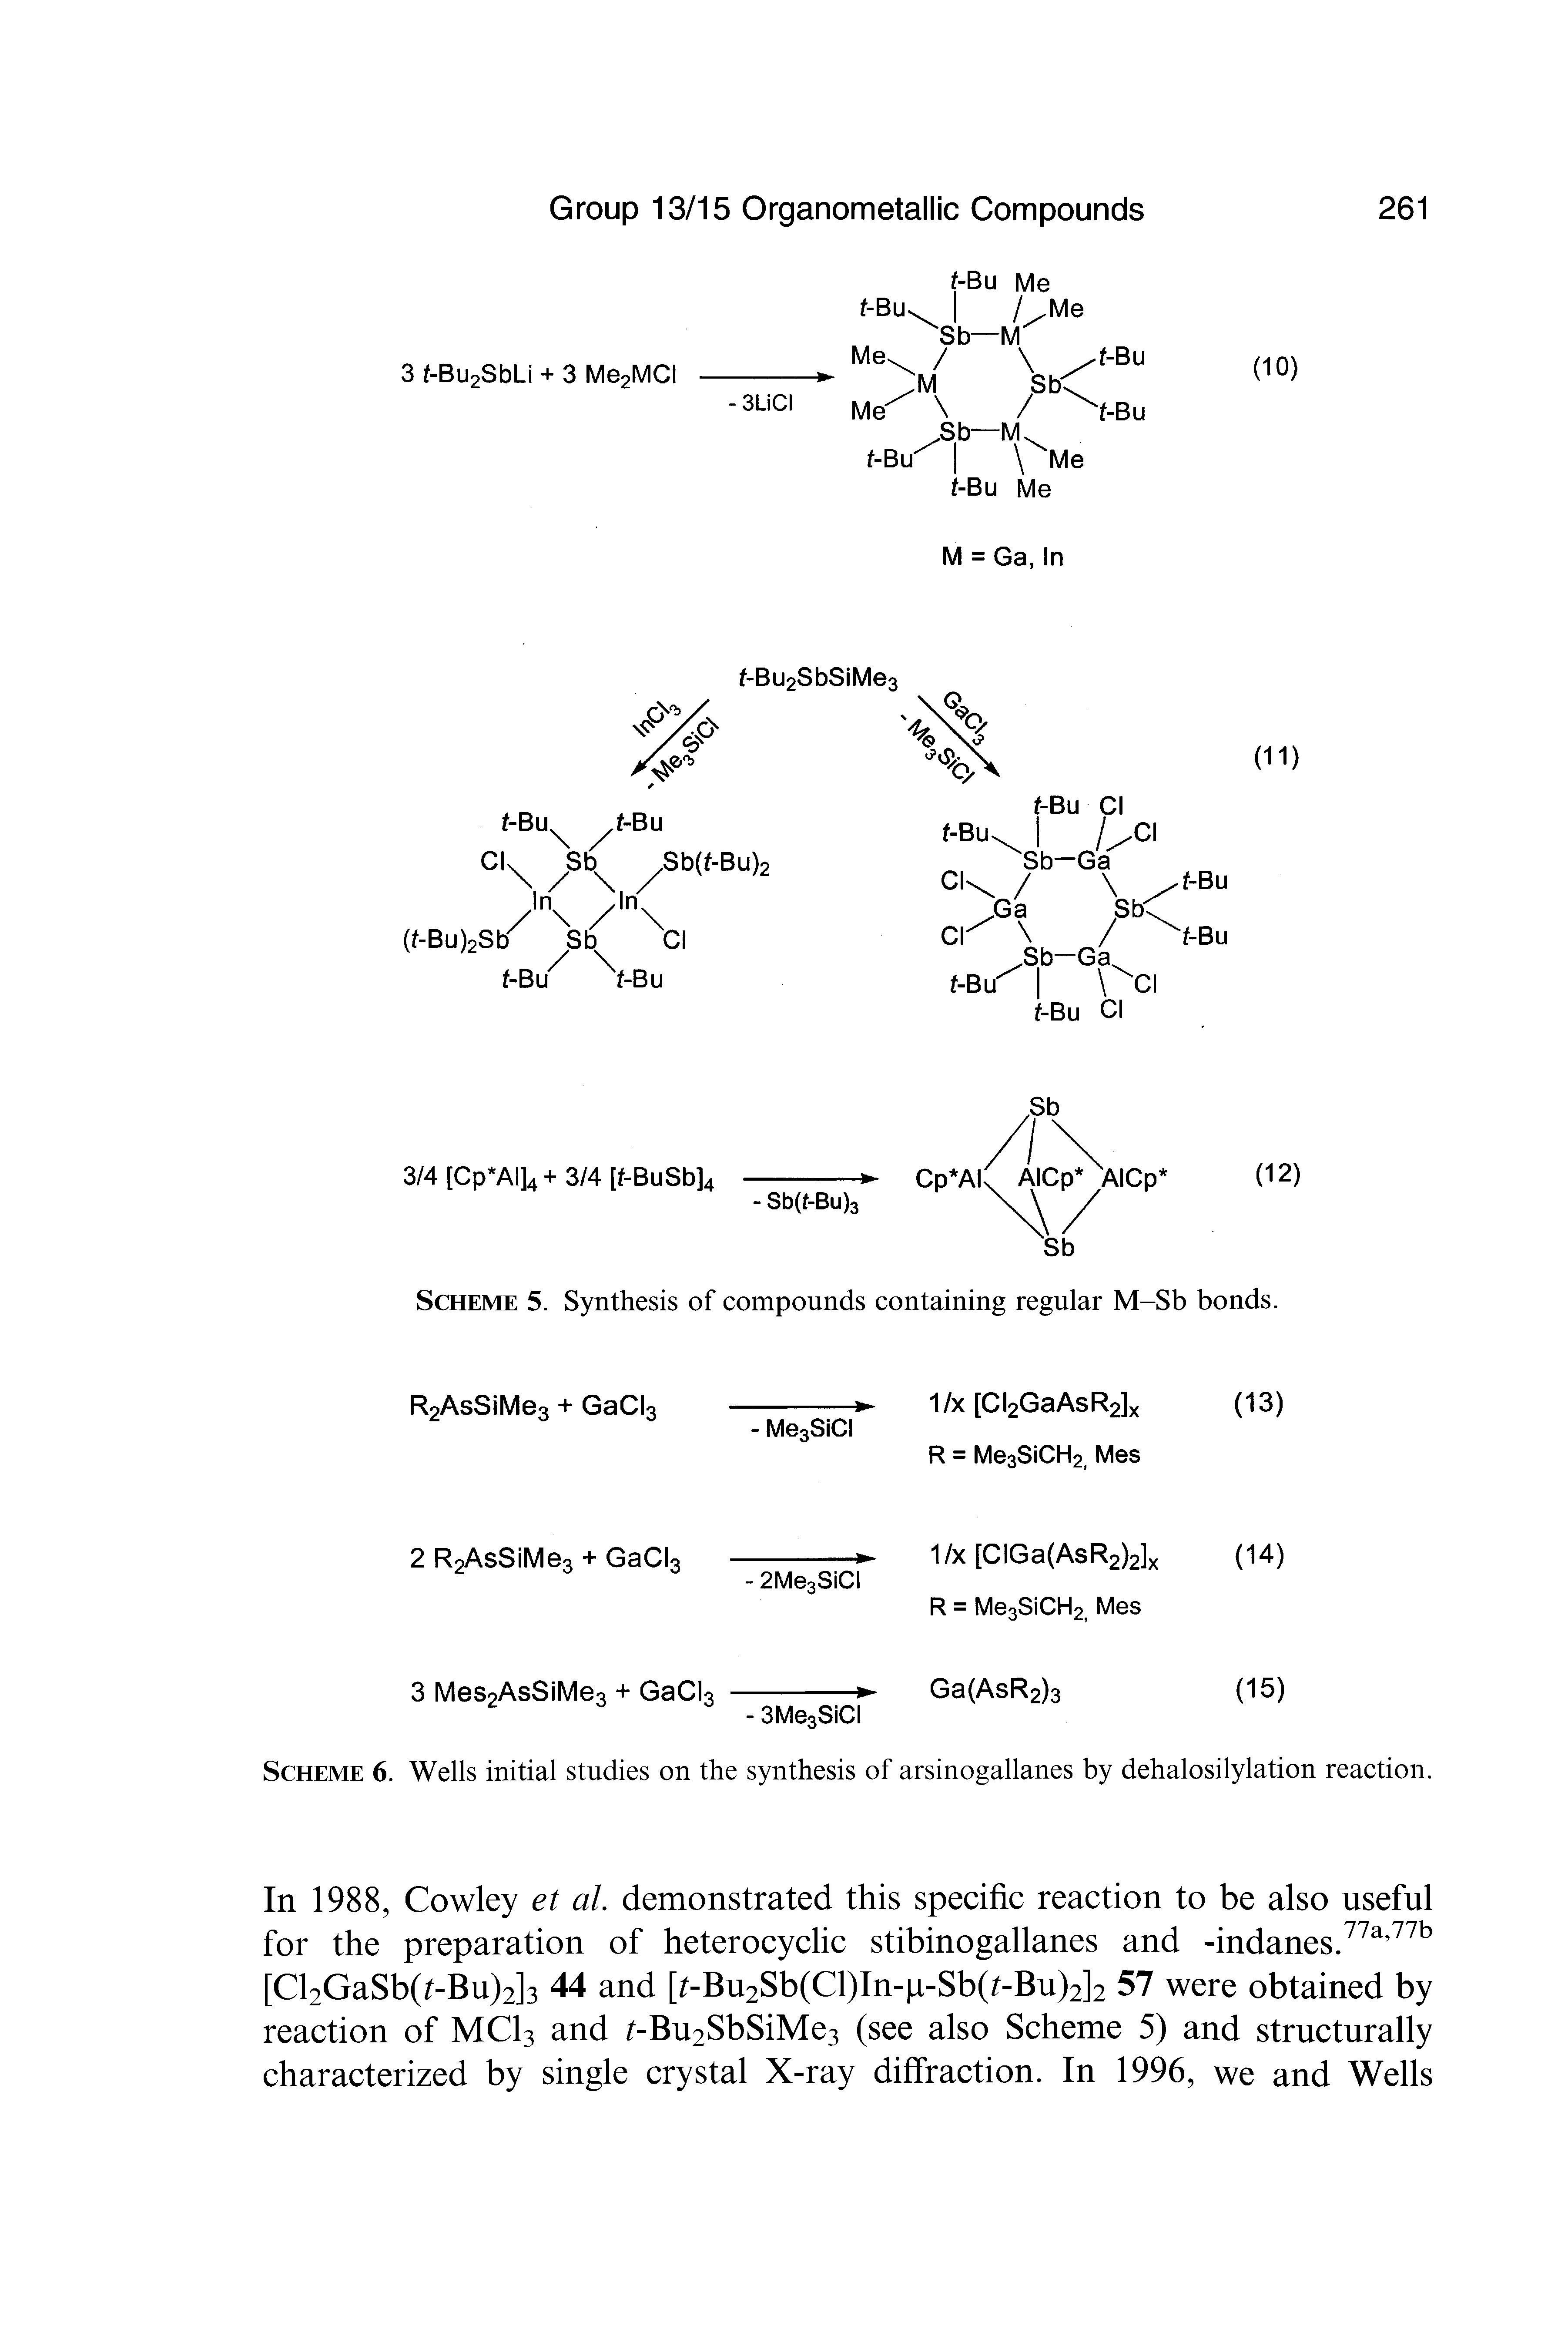 Scheme 6. Wells initial studies on the synthesis of arsinogallanes by dehalosilylation reaction.